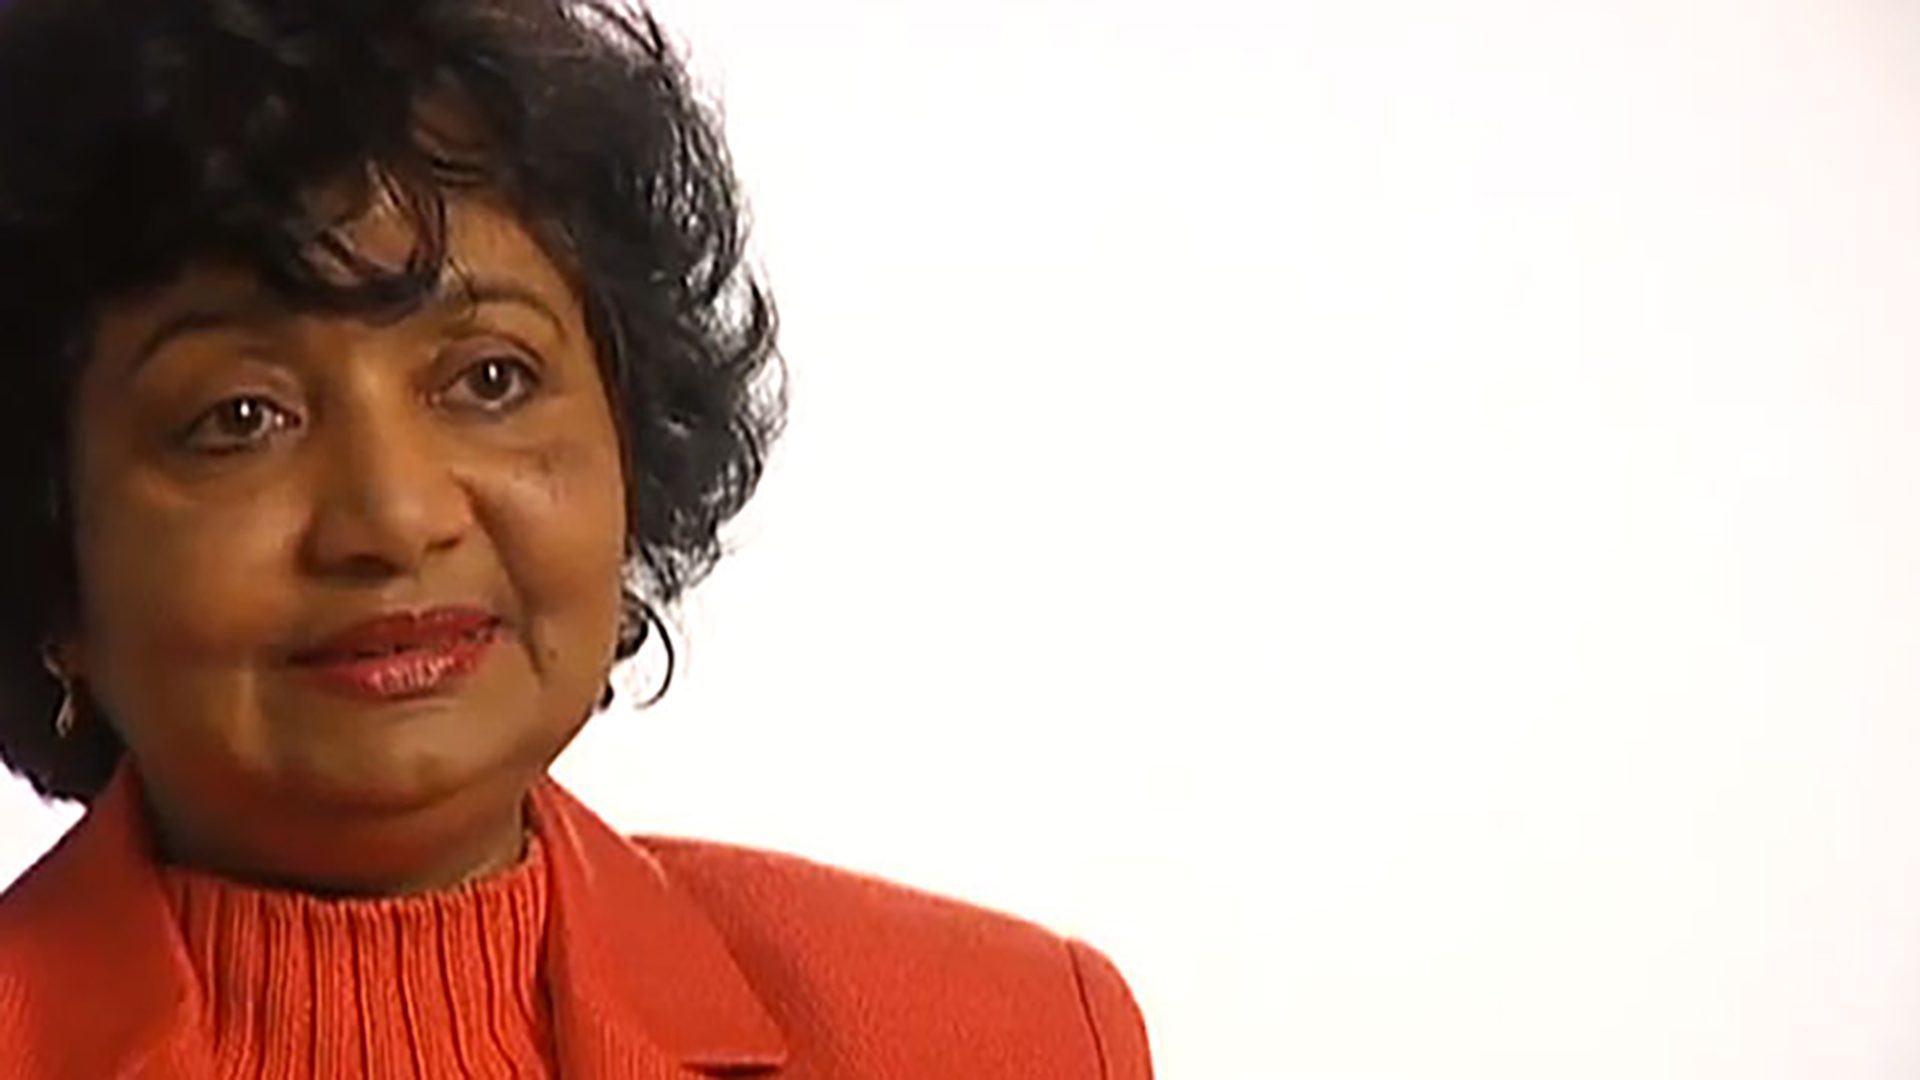 A middle aged woman wearing a red coat is interviewed on a white background